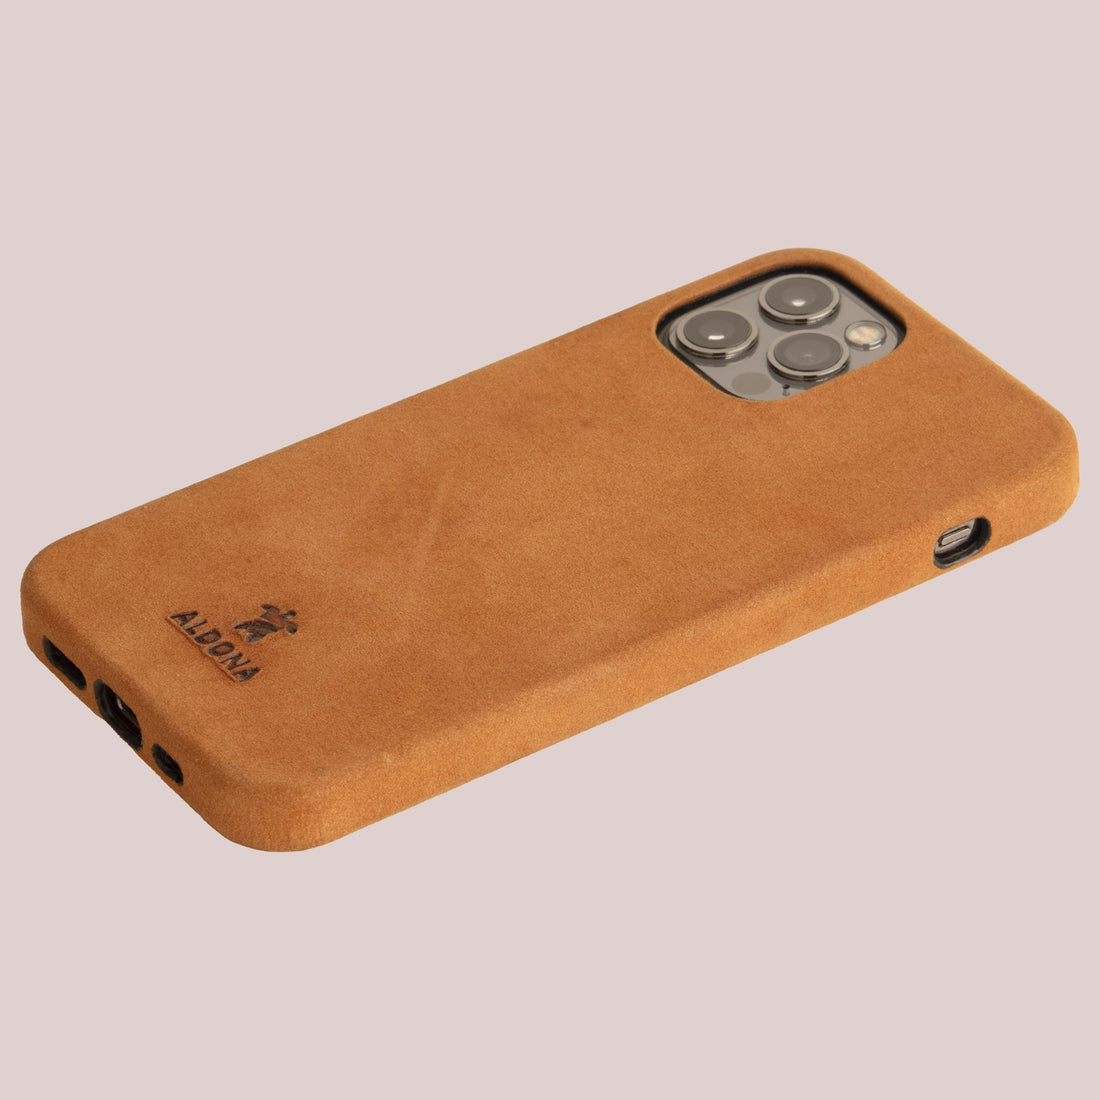 Kalon Case for iPhone 12 Pro Max with MagSafe Compatibility - Vintage Tan